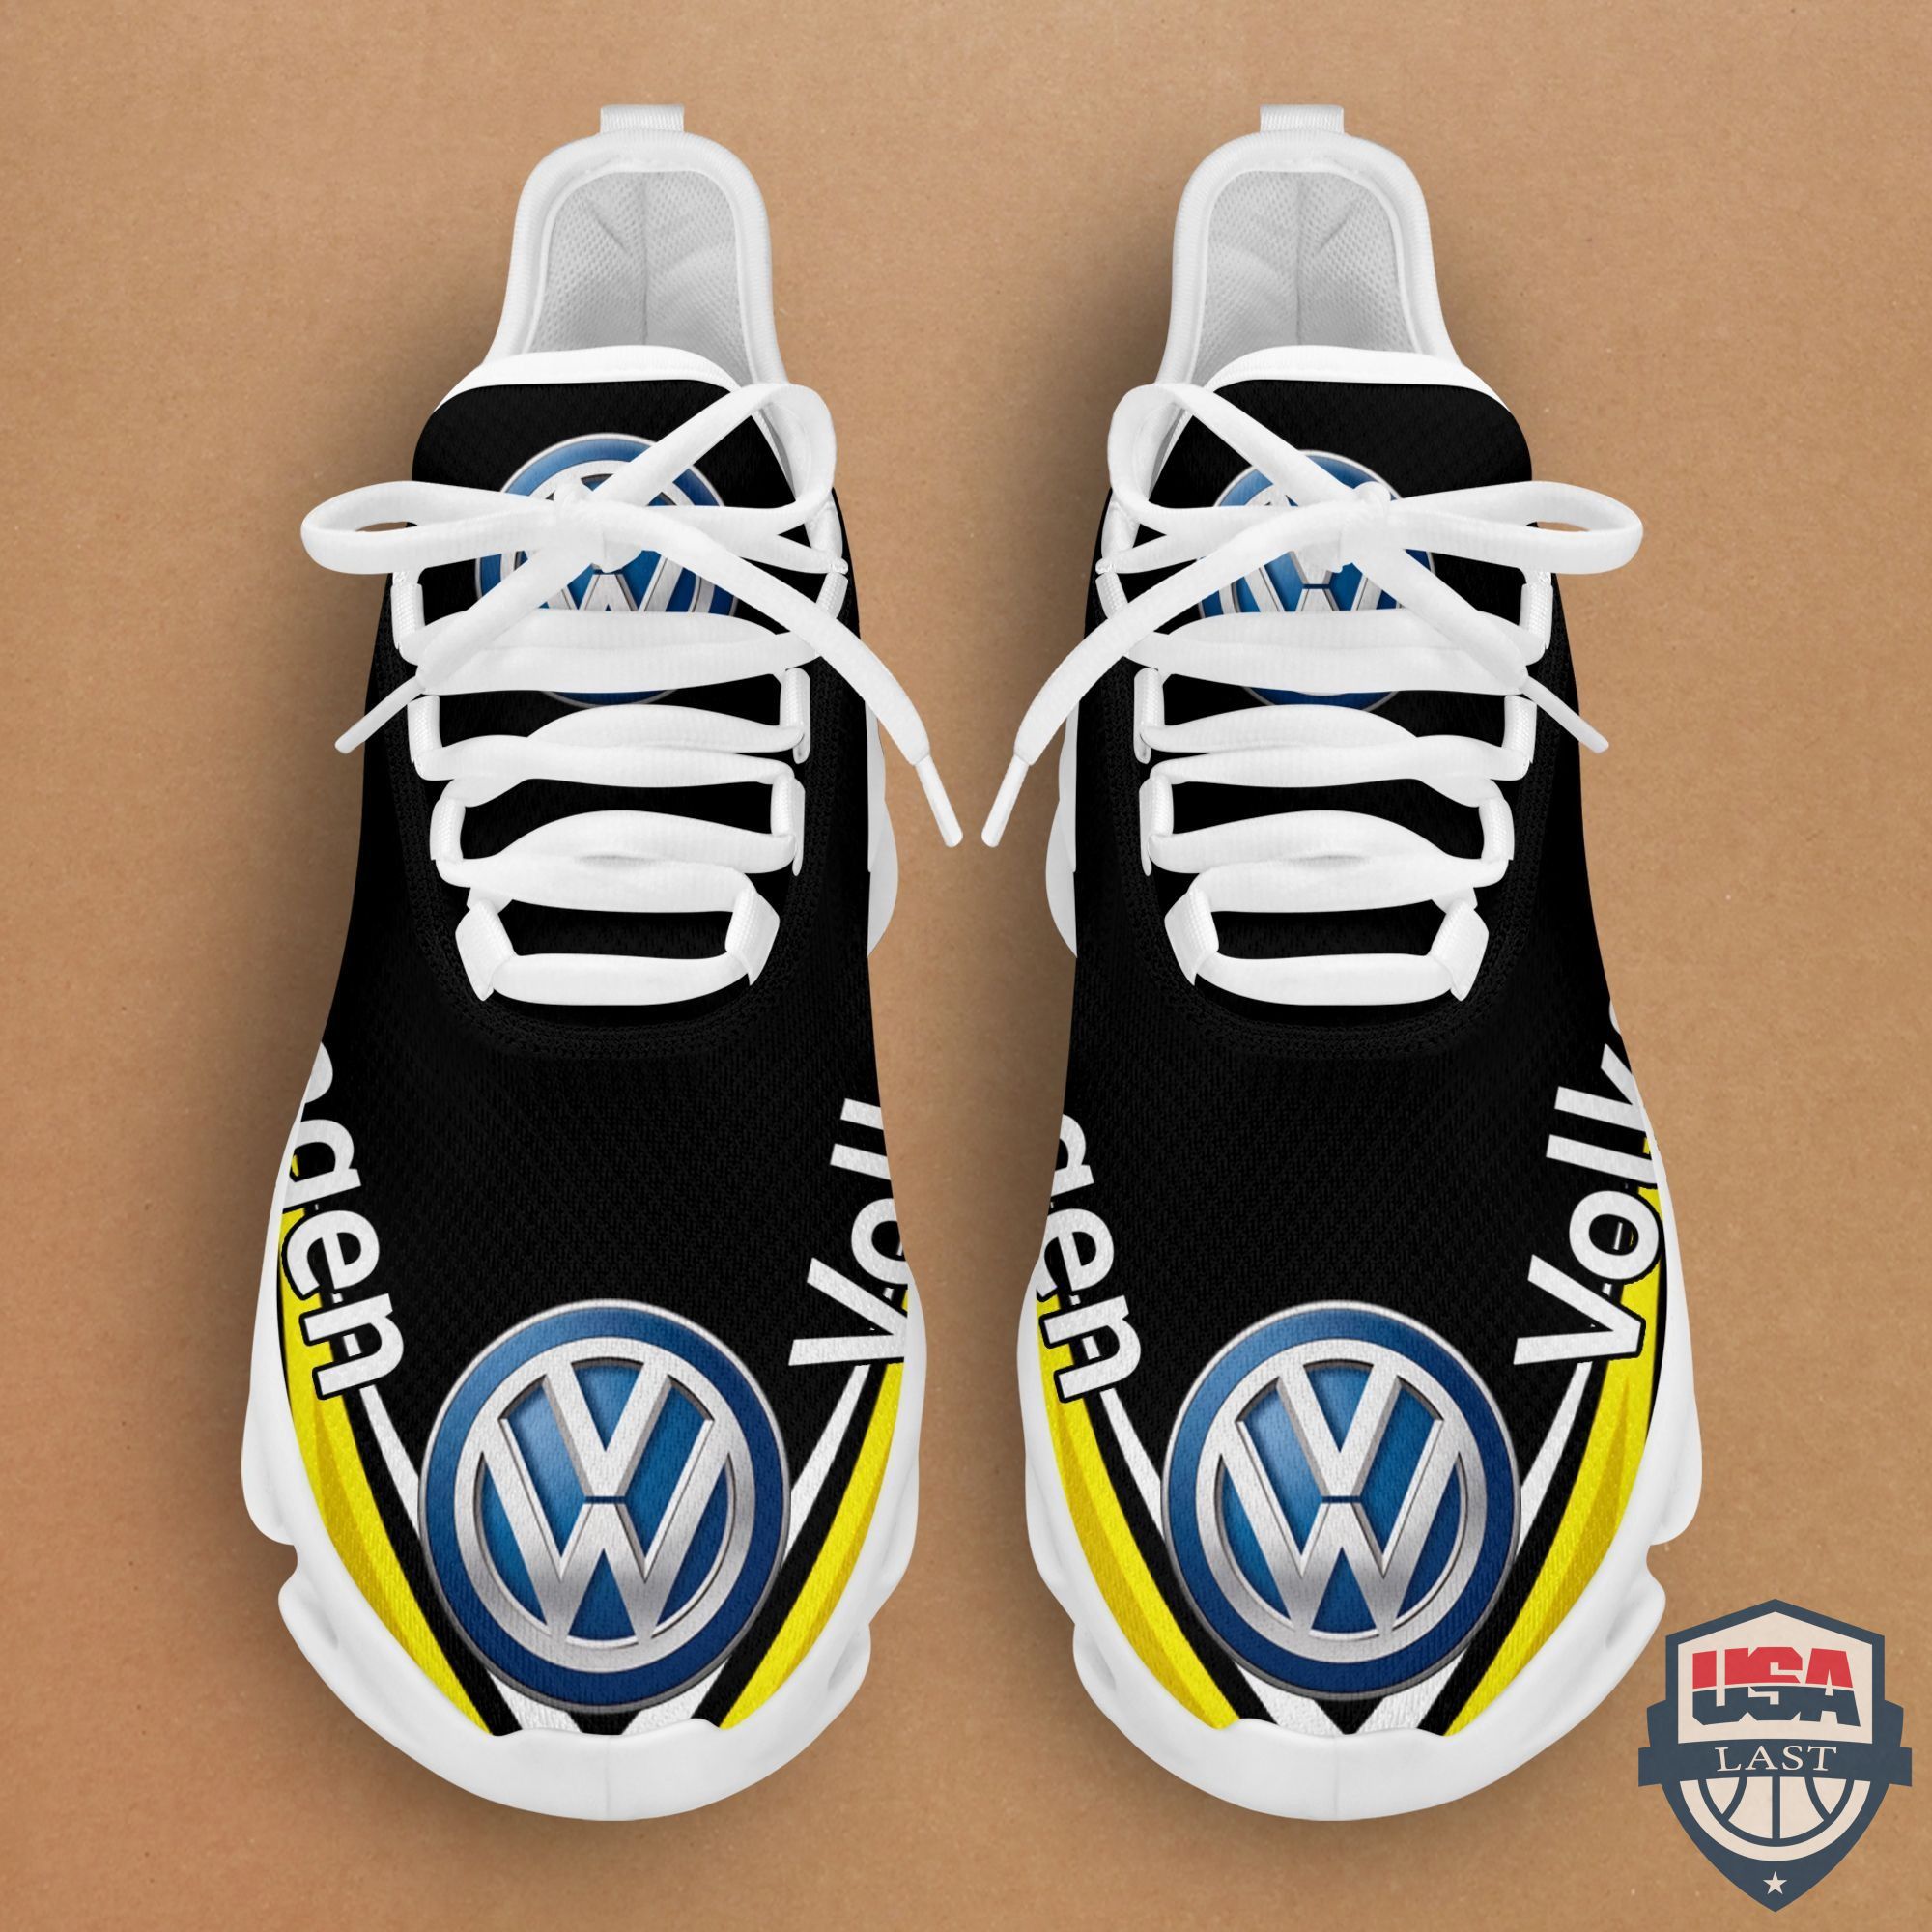 Volkswagen Max Soul Chunky Shoes Yellow Version